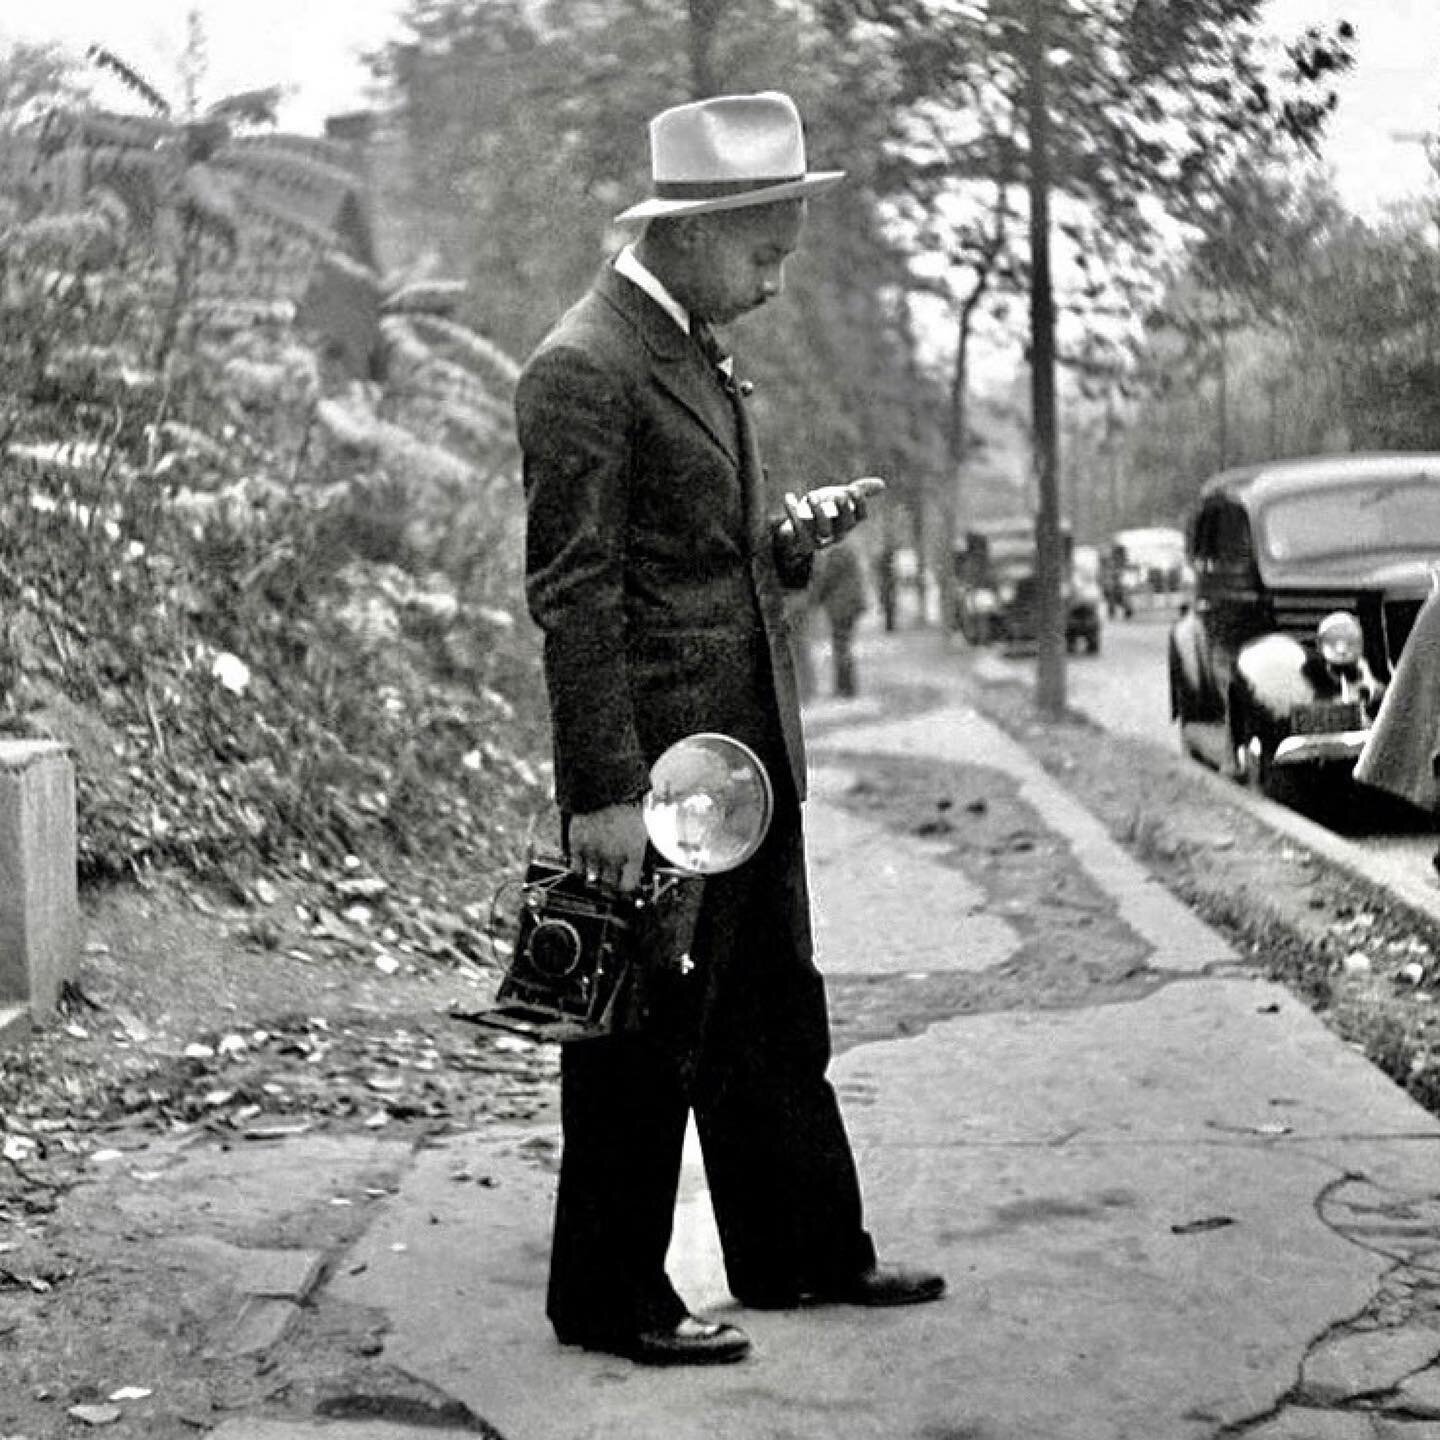 &ldquo;Harris &quot;Teenie&quot; a famous American Press Photographer, was born on July 2nd, 1908 in Pittsburgh, Pennsylvania, USA, the son of hotel owners in the city's Hill District. Early in the 1930s he purchased his first camera and opened a pho